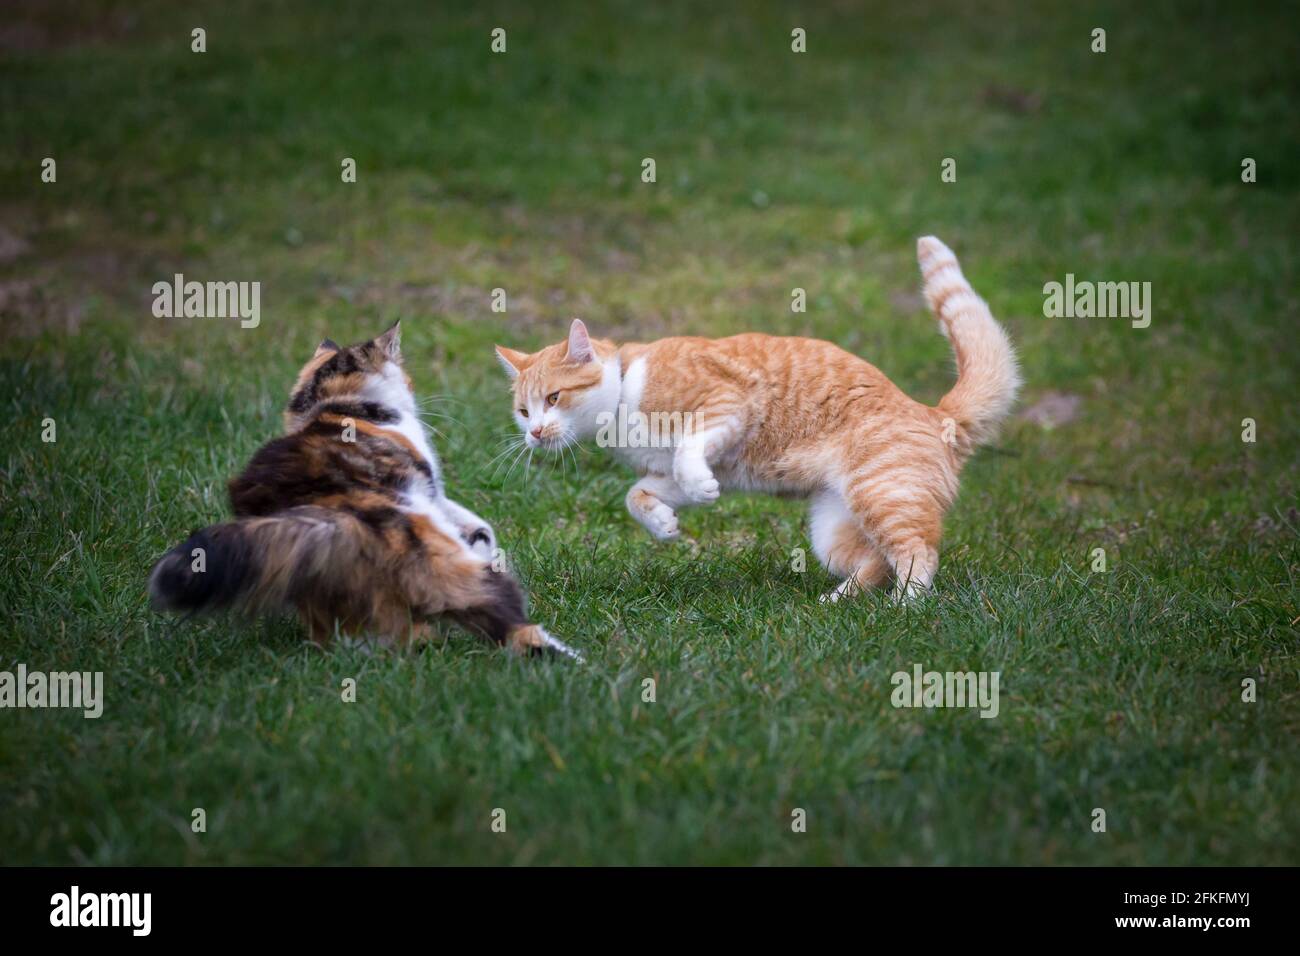 Two cats playing together Stock Photo